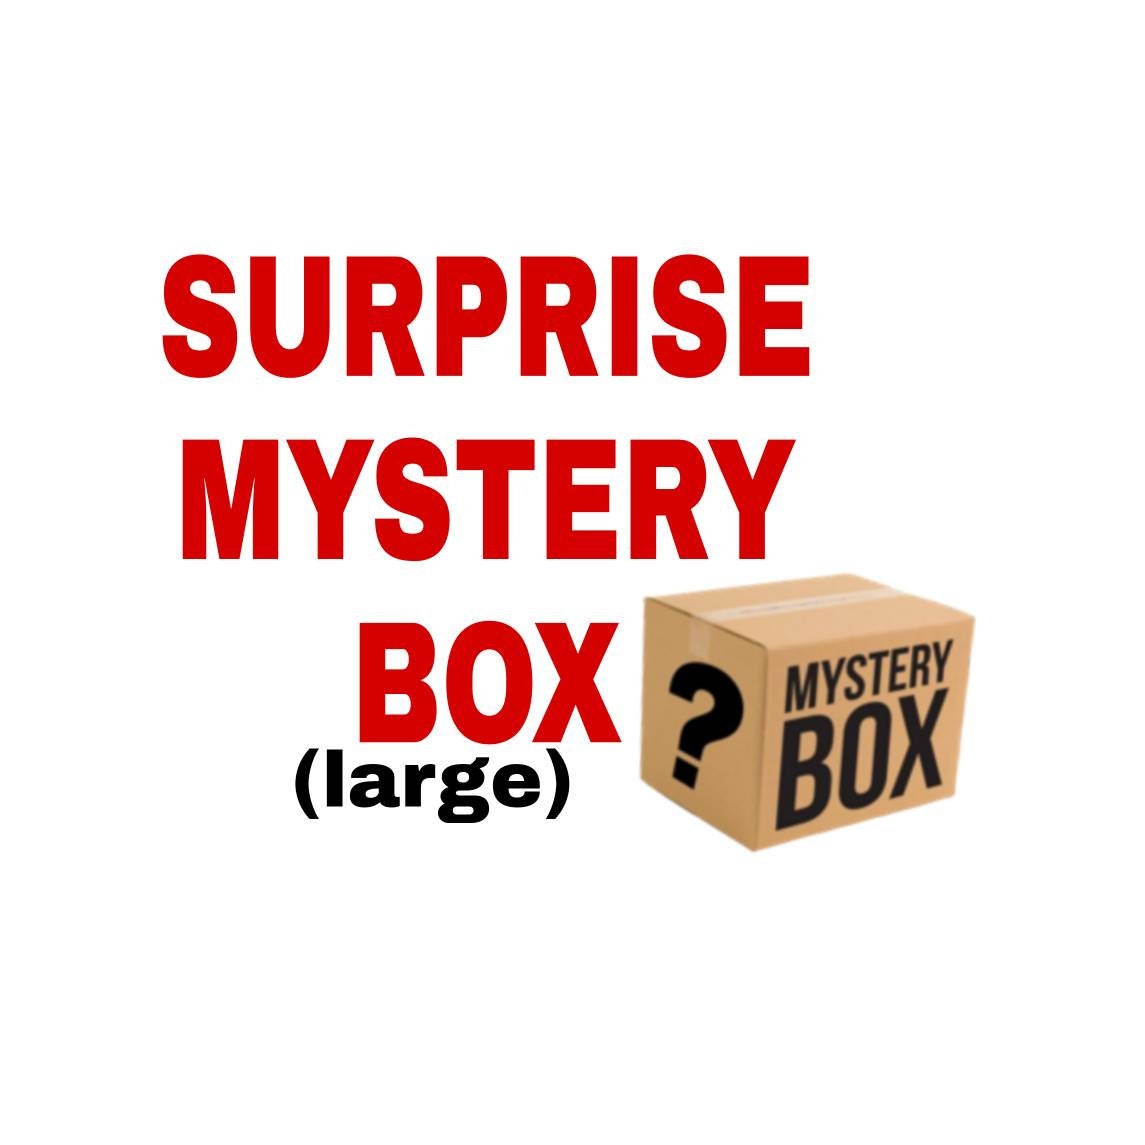 Mystery box large including home decor jewlery and more | Etsy